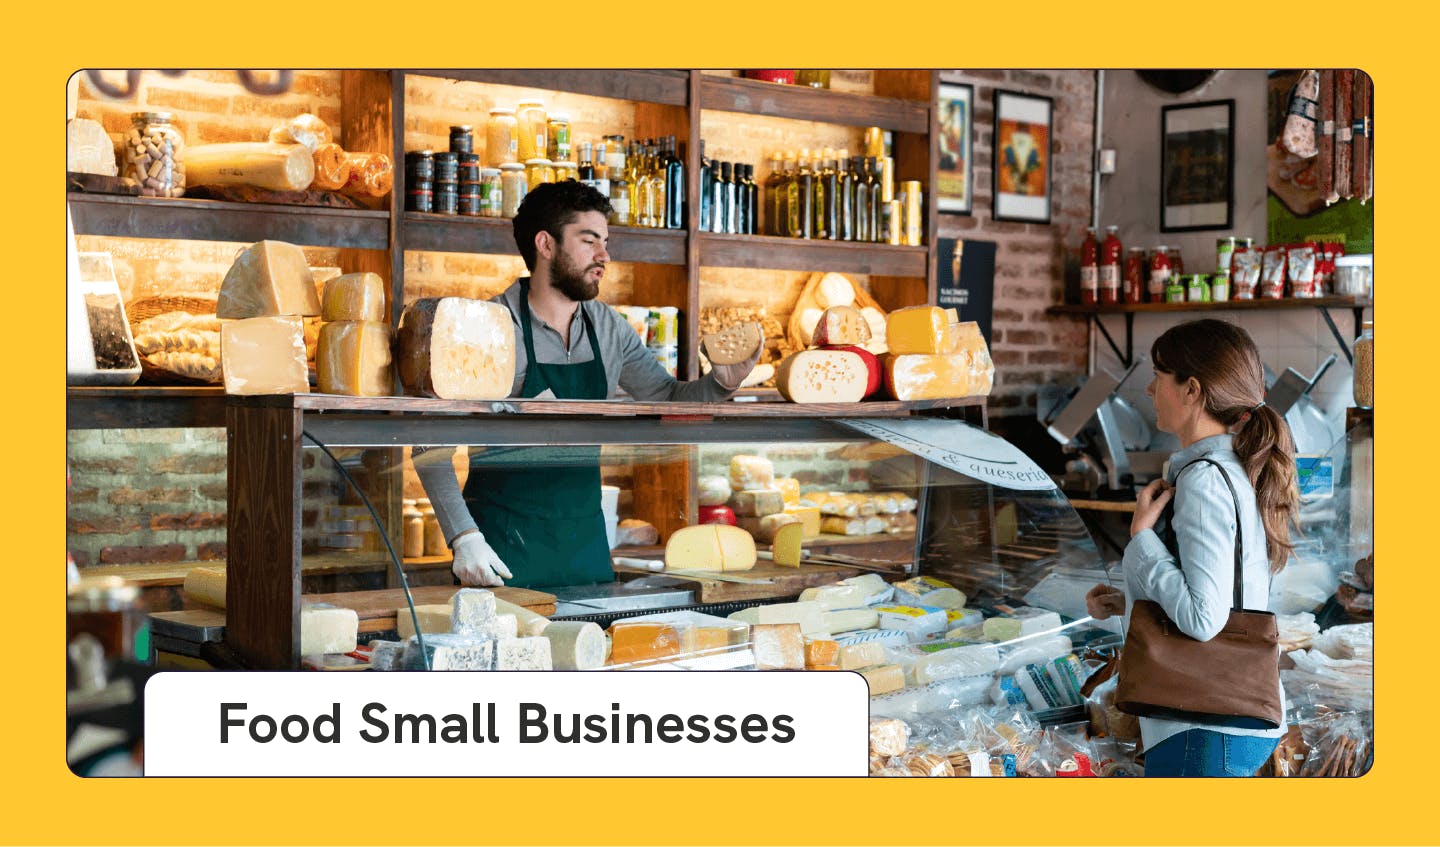 Photograph of a person selling bread at their bakery as an example of a small business idea with text that says “Food Small Businesses.” 